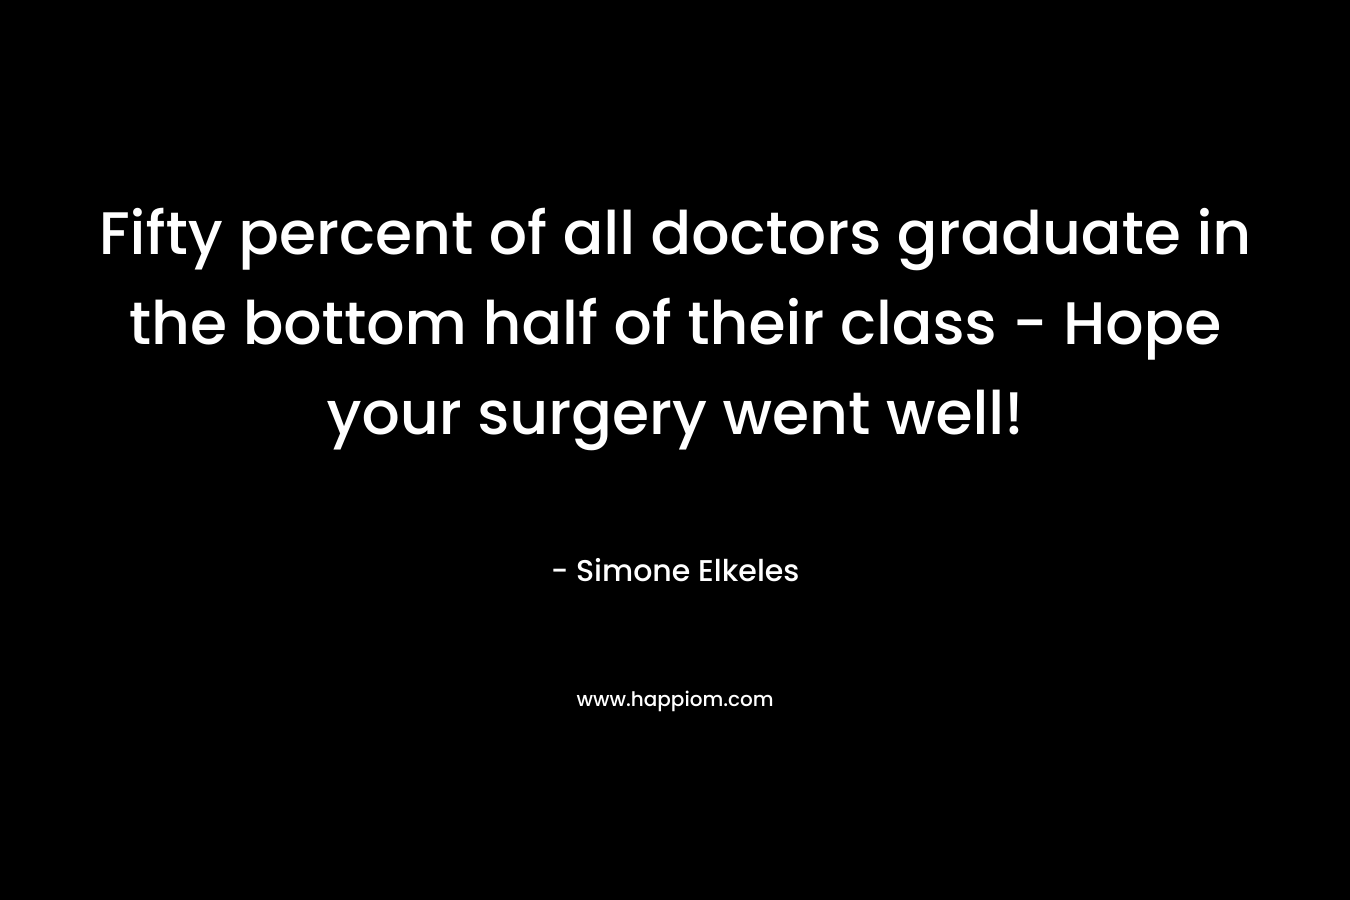 Fifty percent of all doctors graduate in the bottom half of their class - Hope your surgery went well!